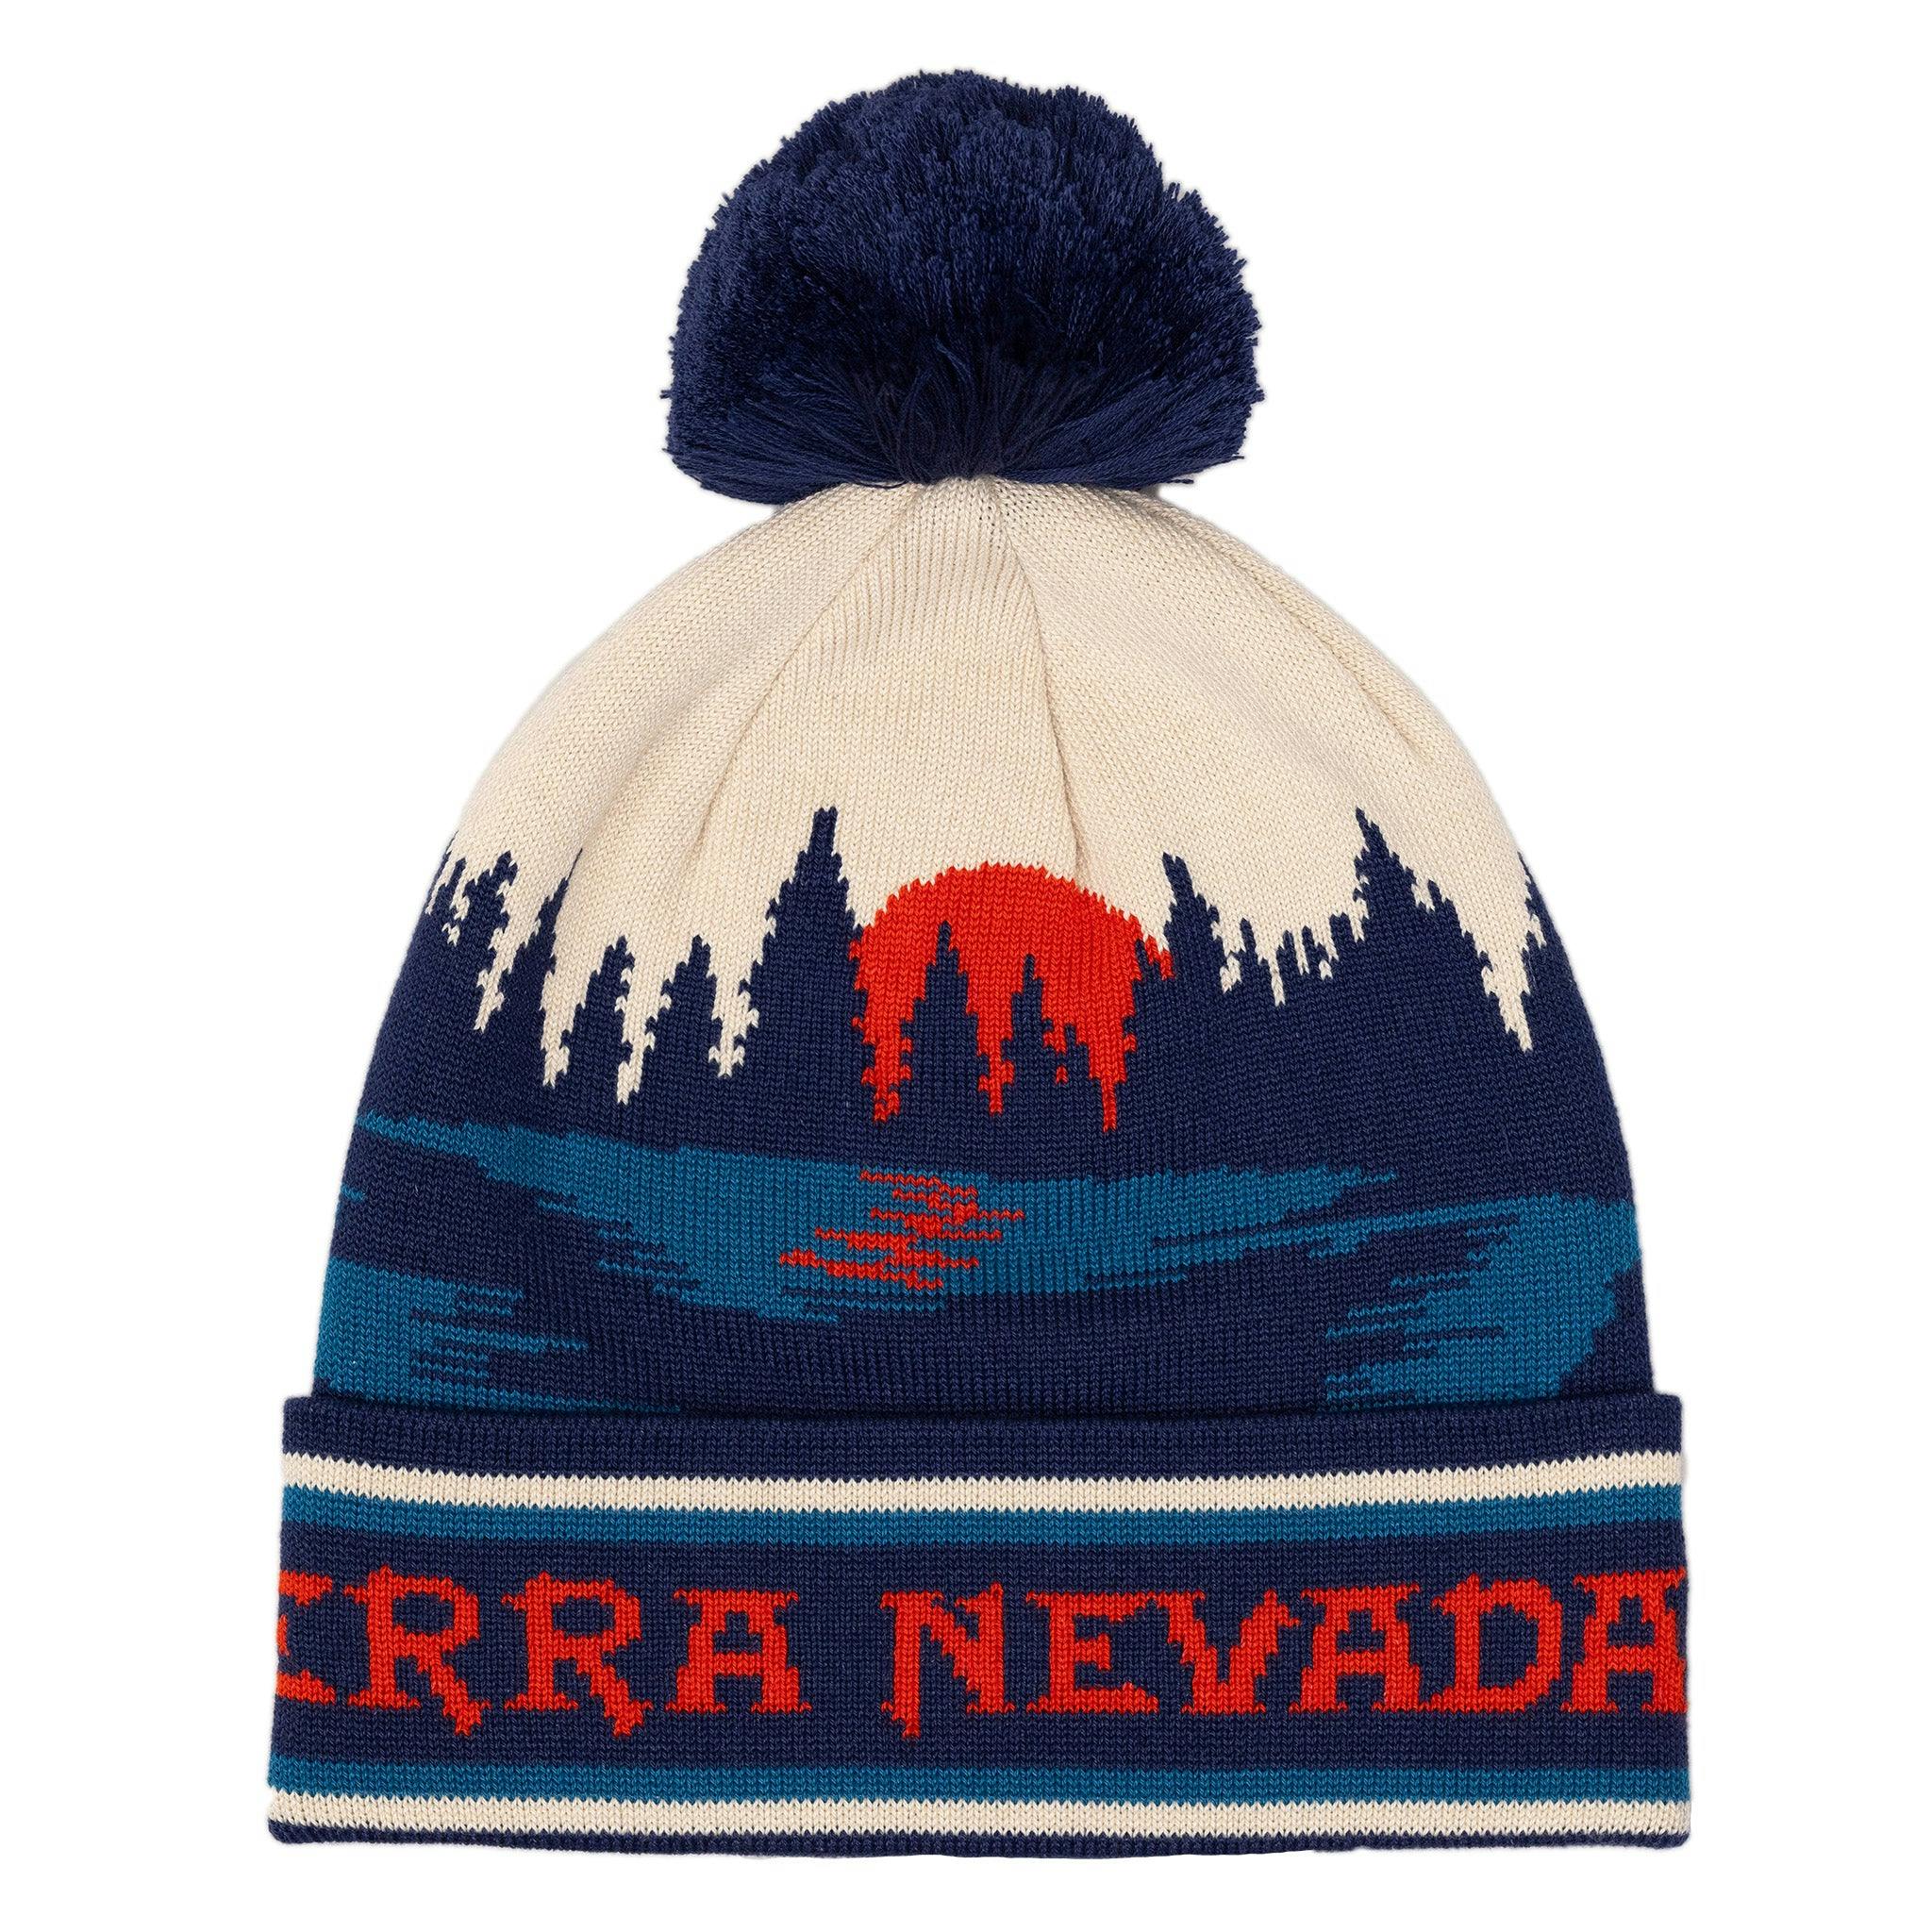 Sierra Nevada Brewing Co. Sunset Lake Pom Beanie - front view